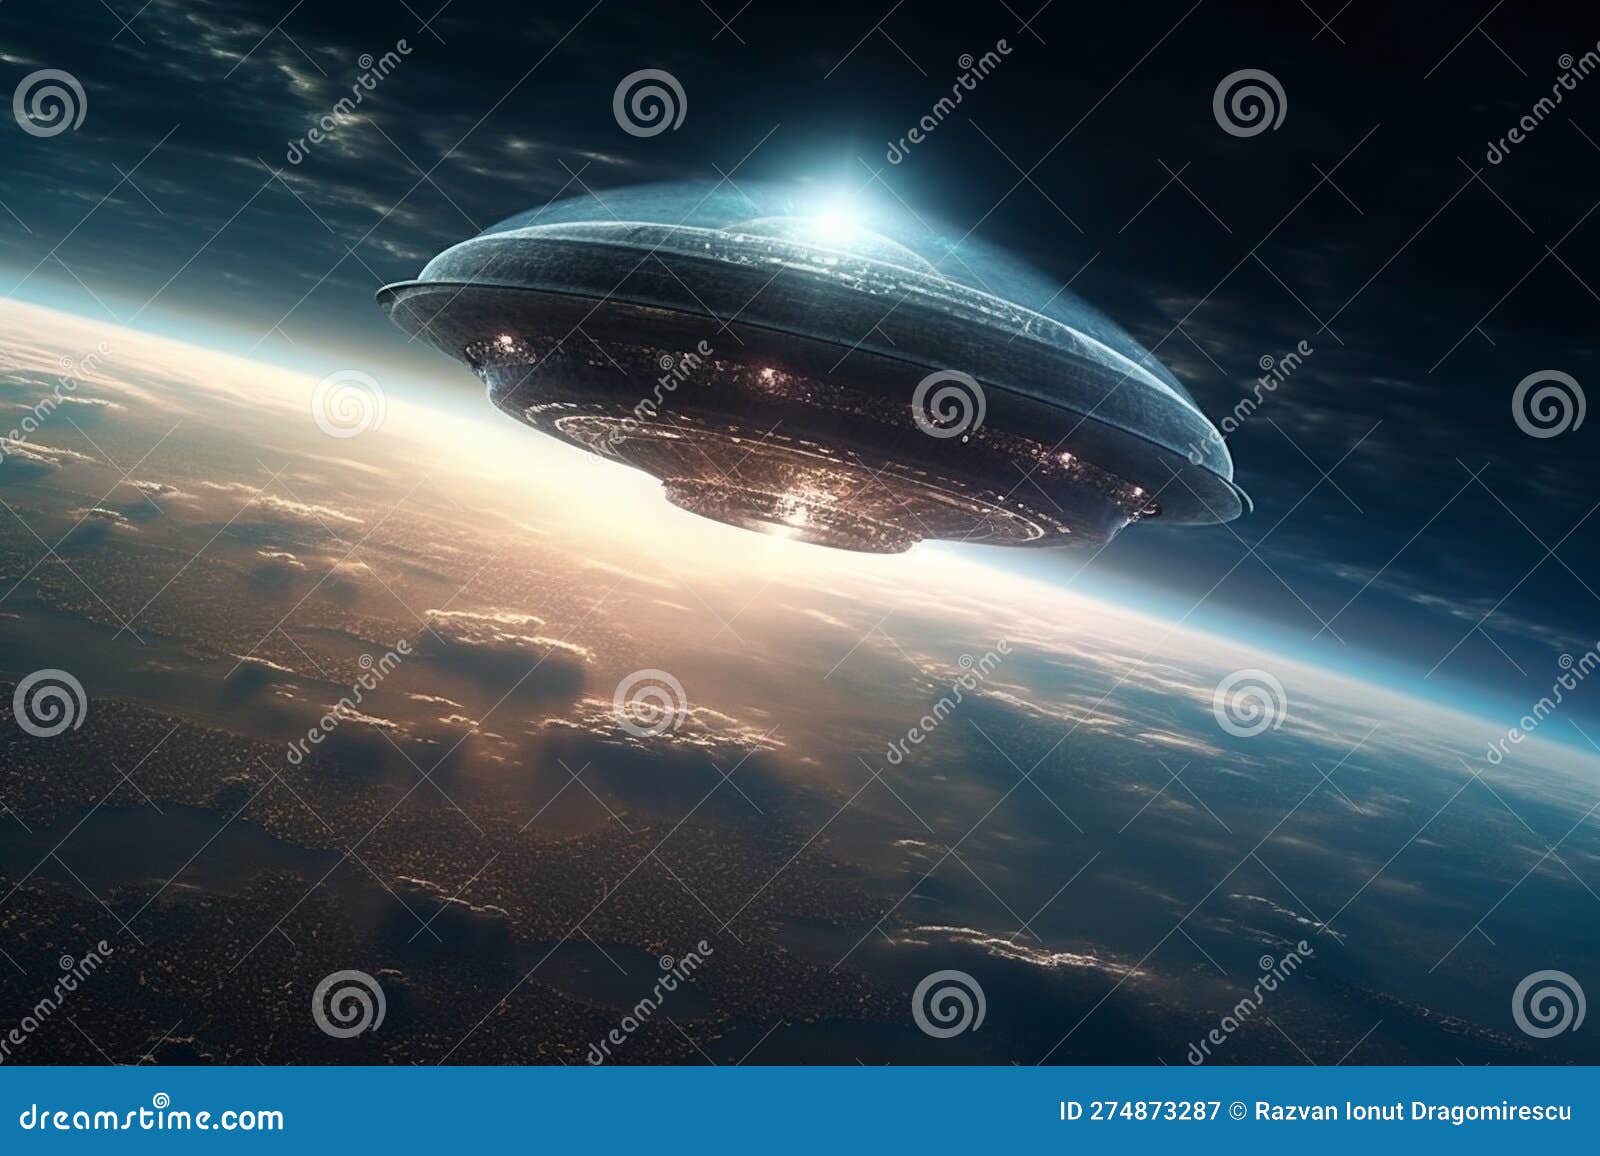 UFO Approaching Earth from Space, with a Sense of Mystery and Intrigue